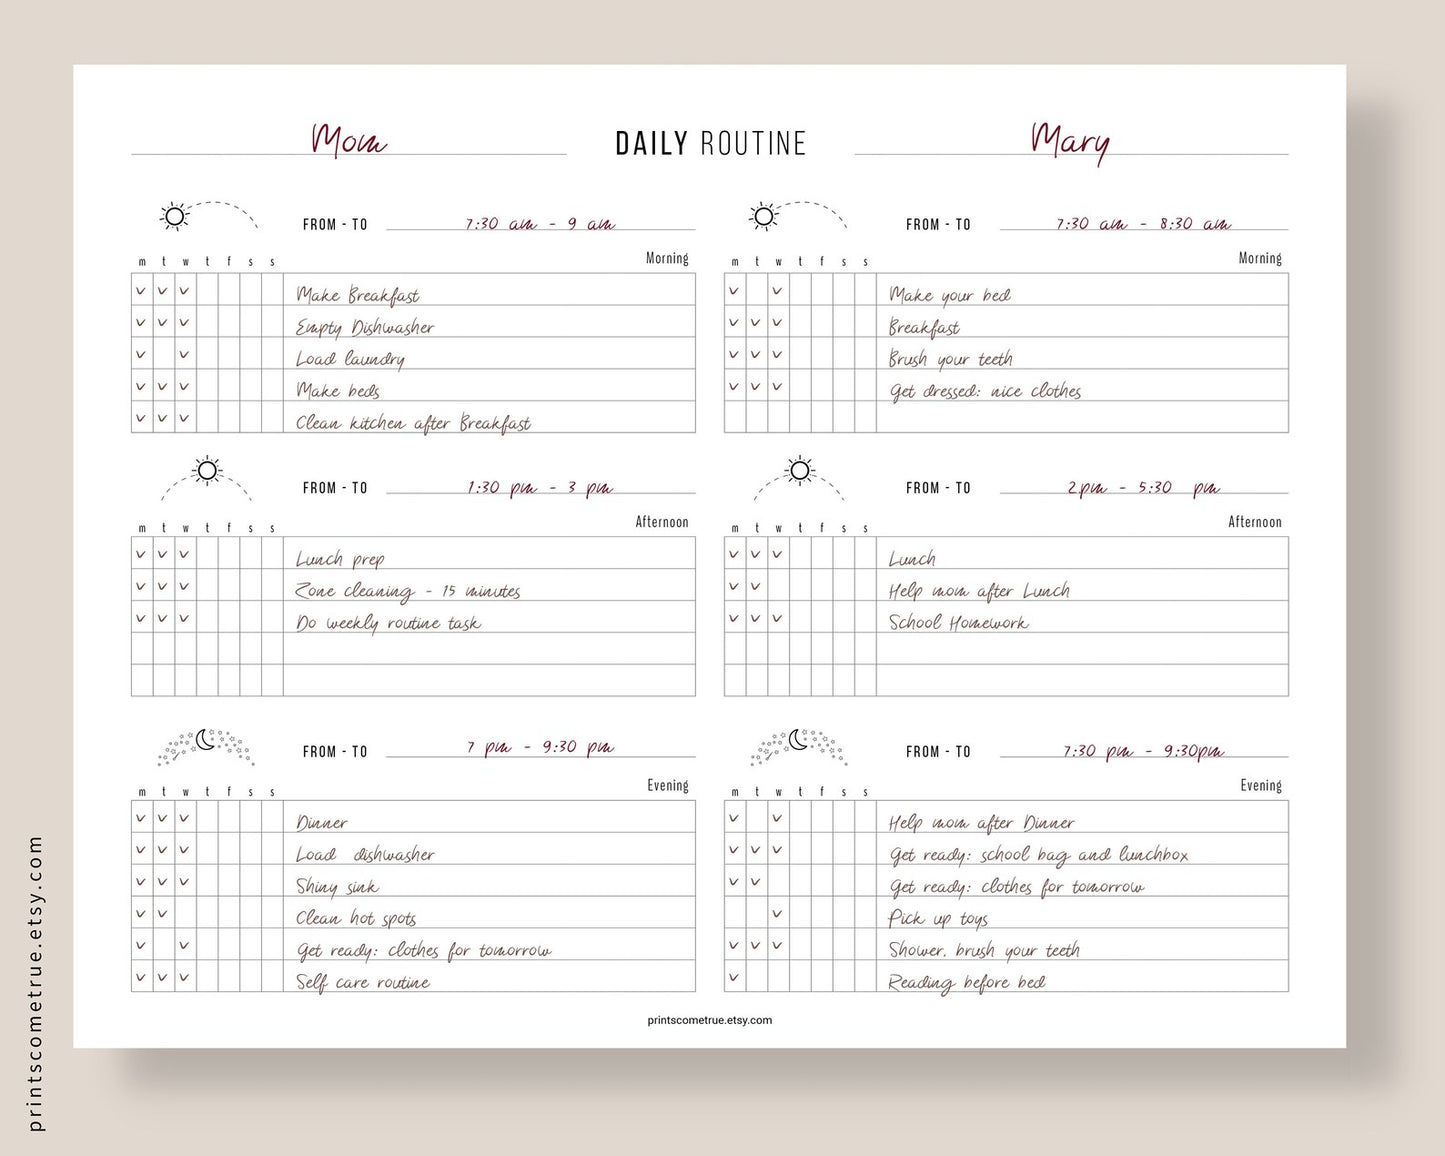 Daily Routine for Family - Printable Planner PDF - Letter - 2